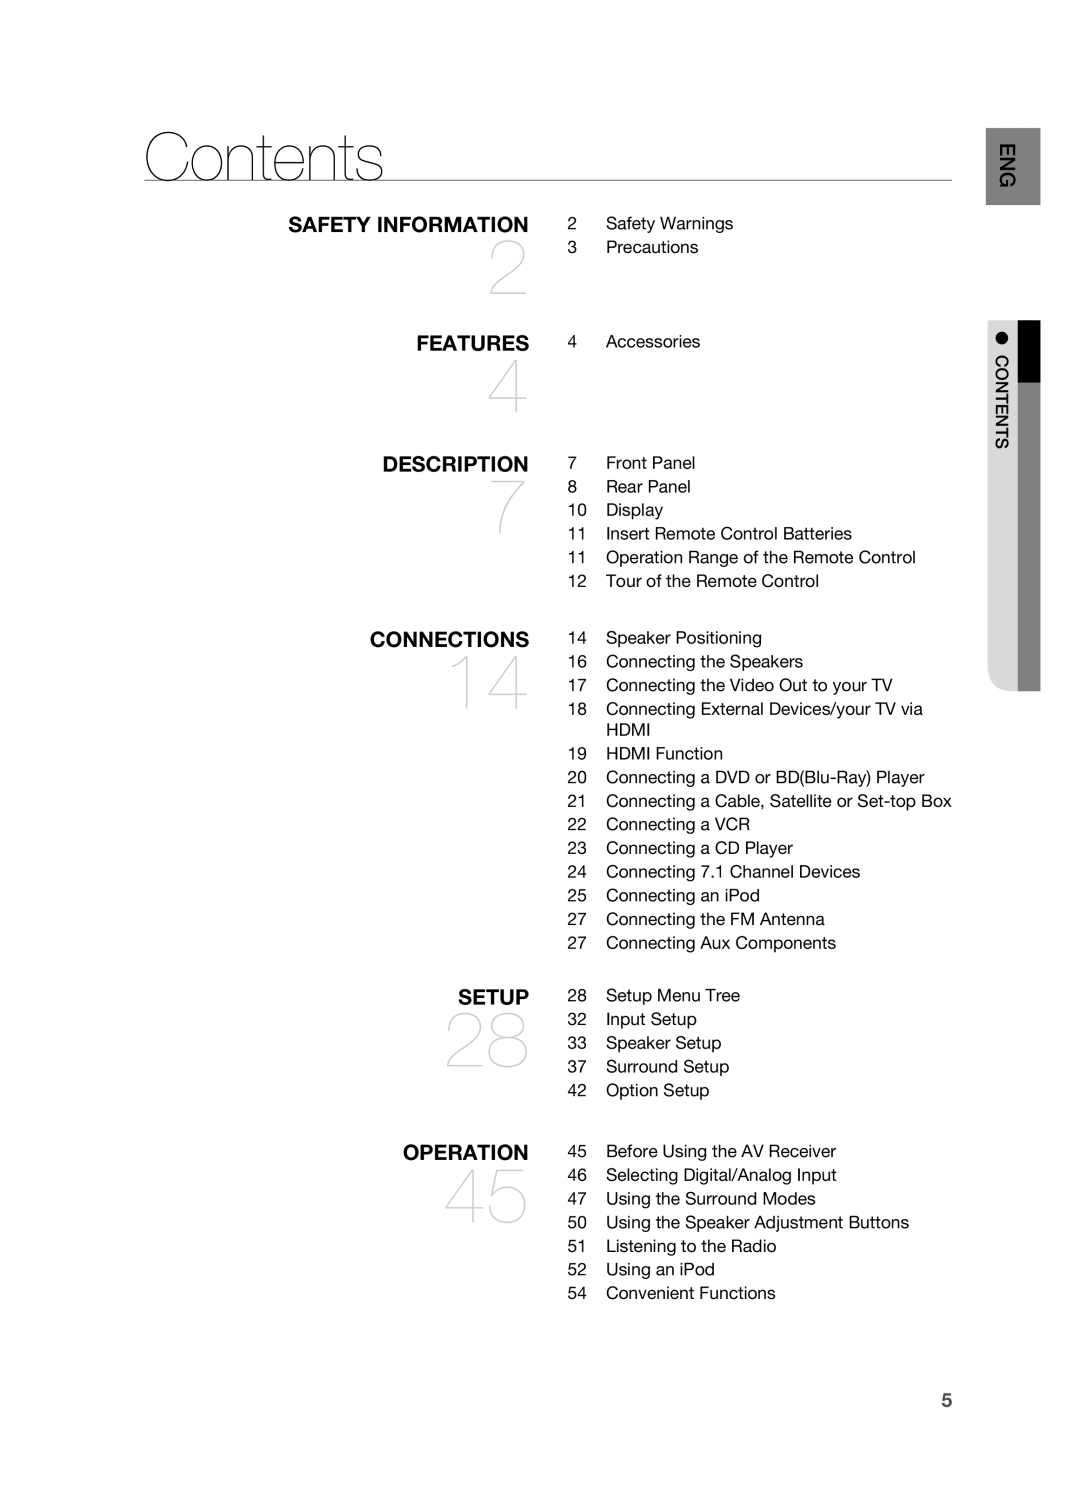 Samsung HT-AS730ST user manual Contents, safety information, features, description, connections, setup, Operation 